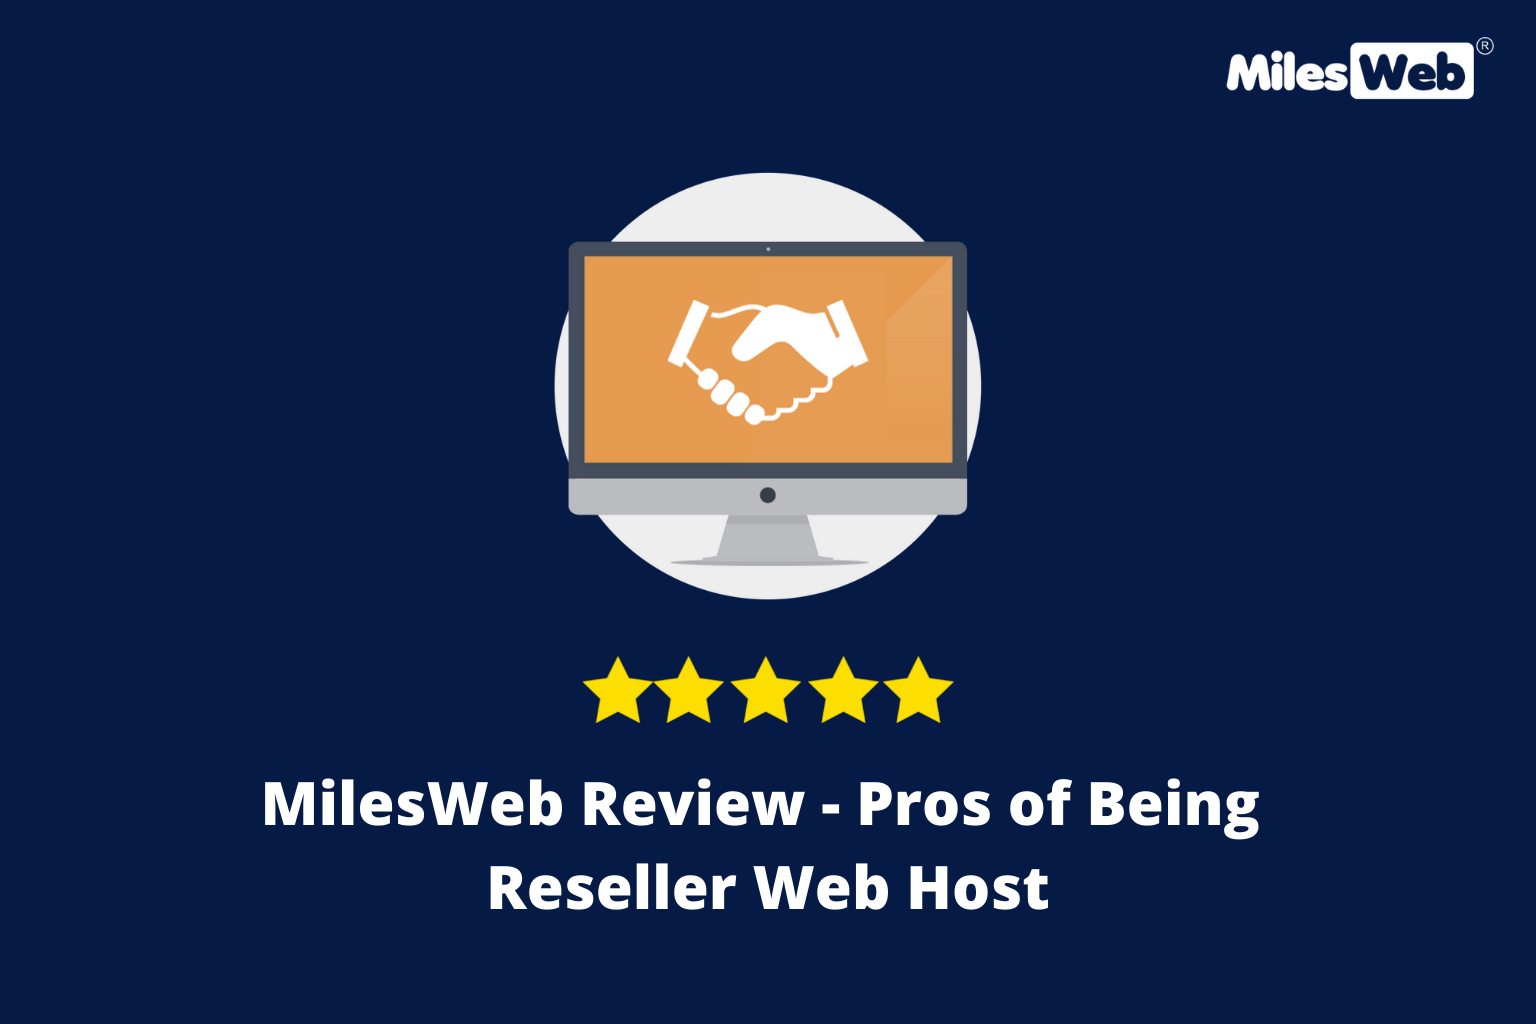 MilesWeb Review - Pros of Being Reseller Web Host